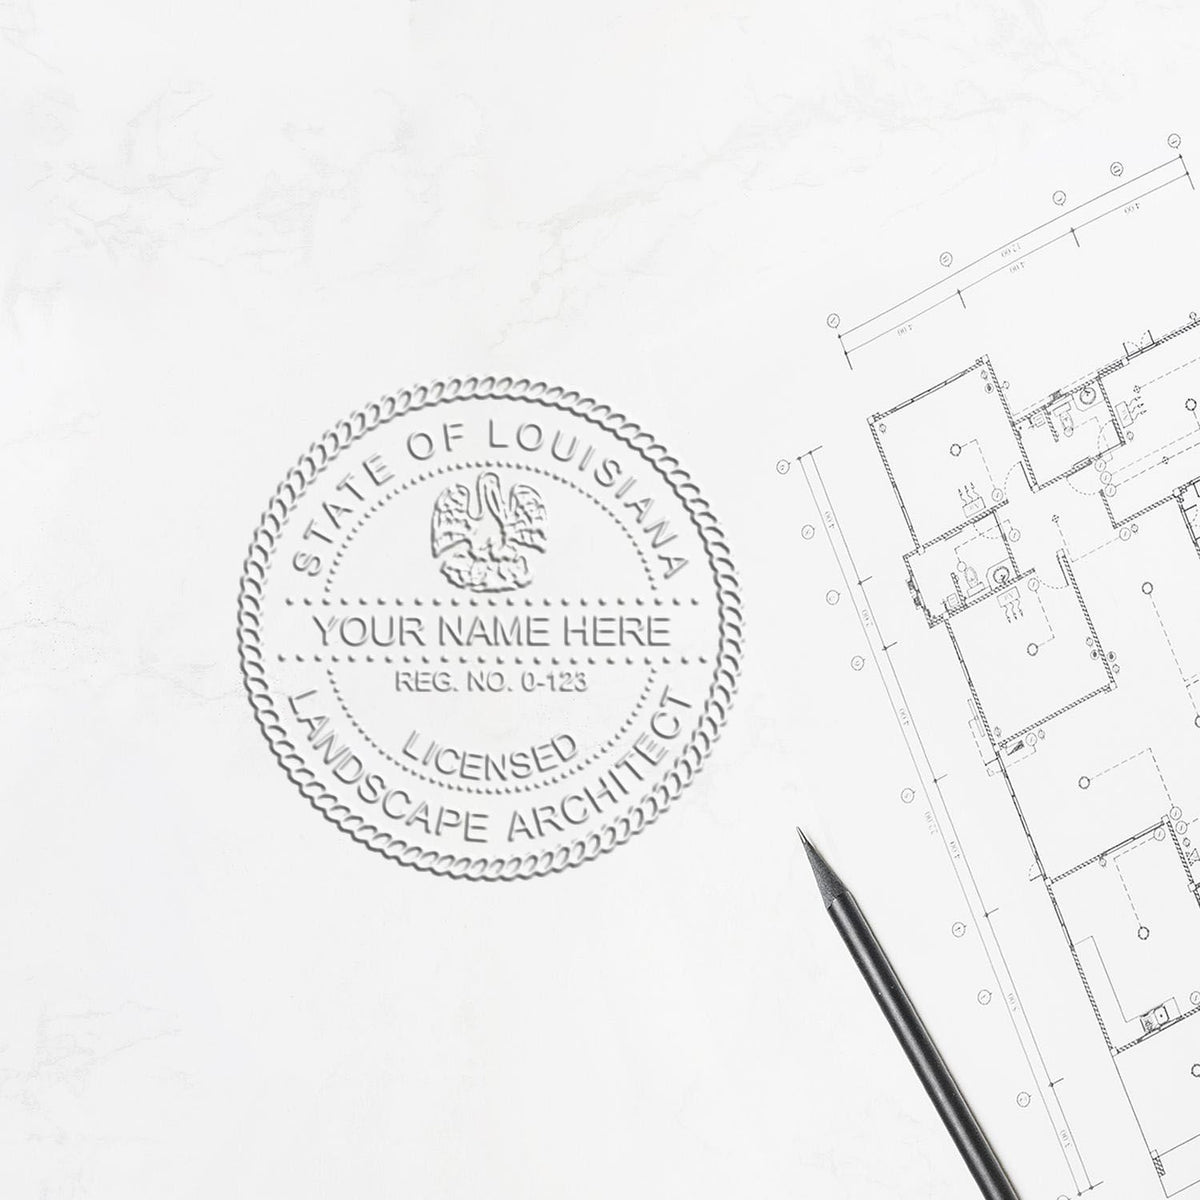 An alternative view of the Gift Louisiana Landscape Architect Seal stamped on a sheet of paper showing the image in use